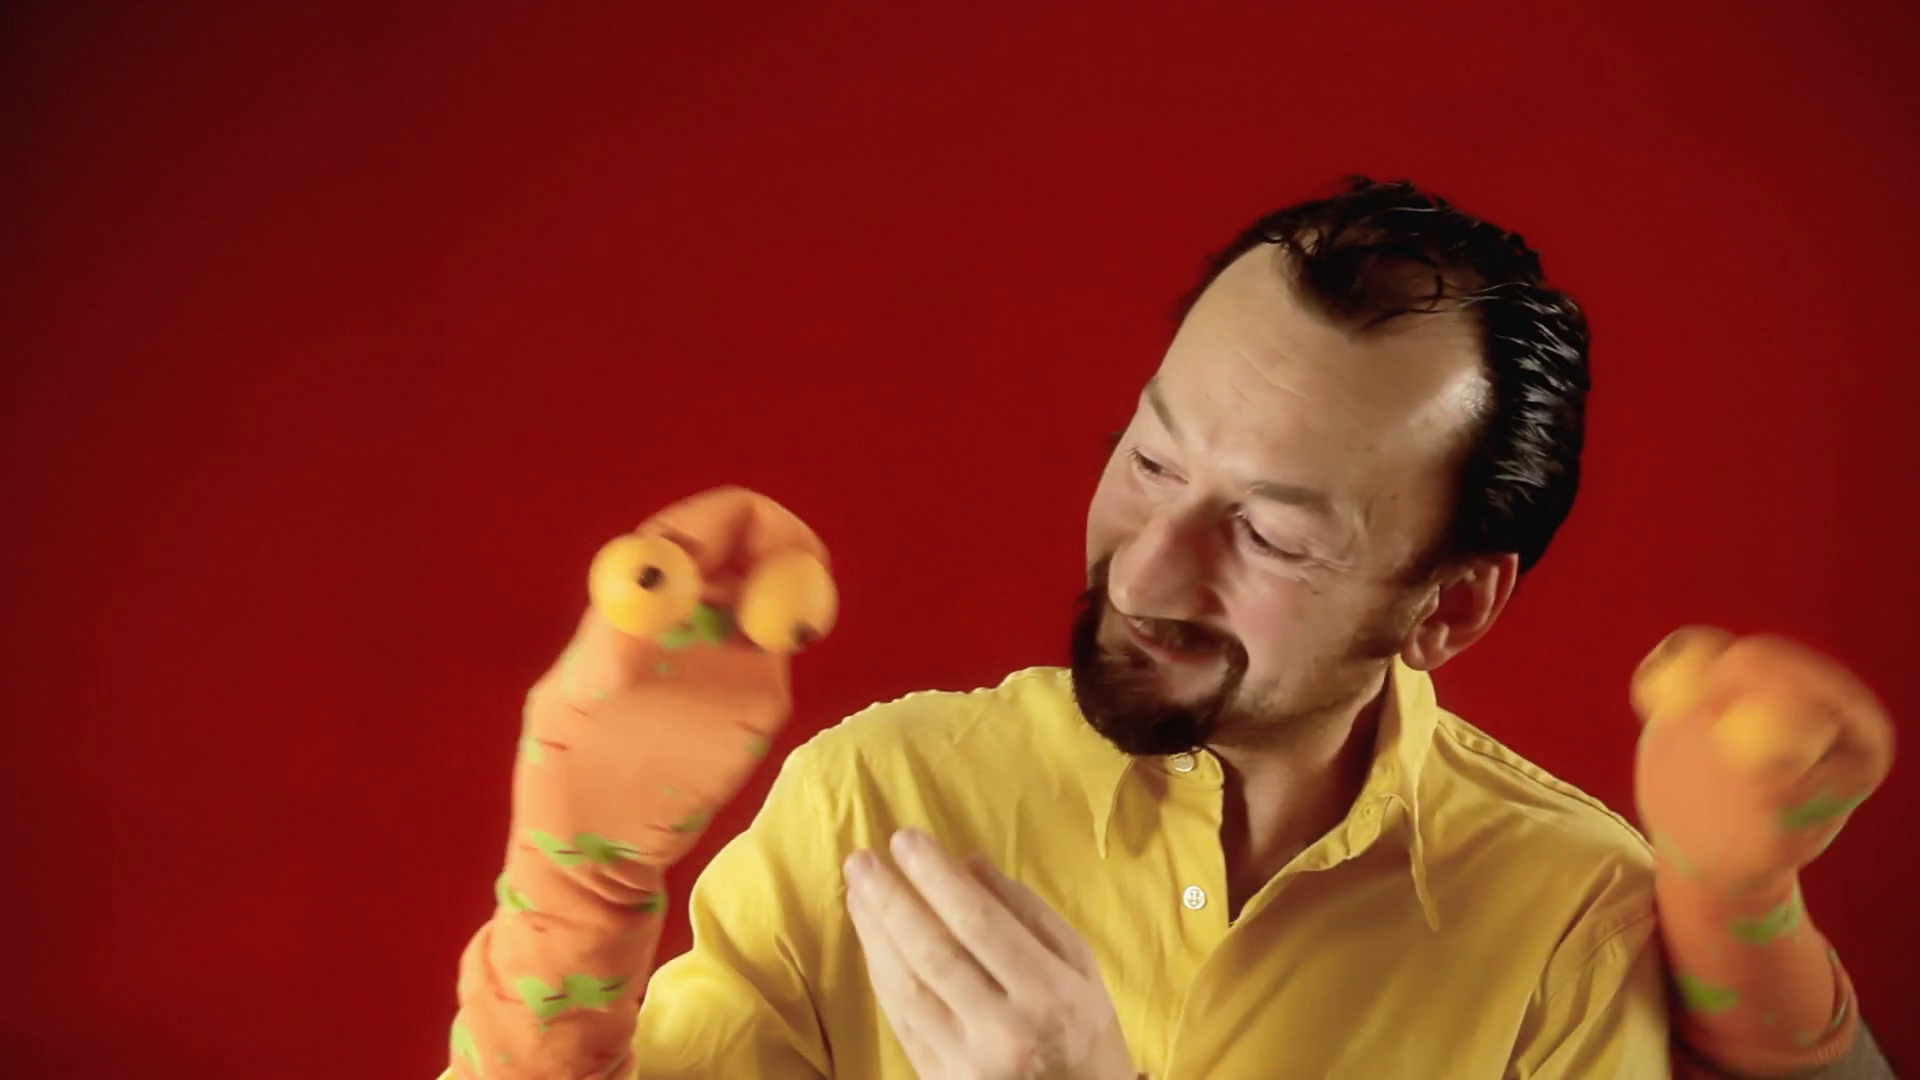 Ugly Man Sock Puppets Bickering. A funny man playing with two ...